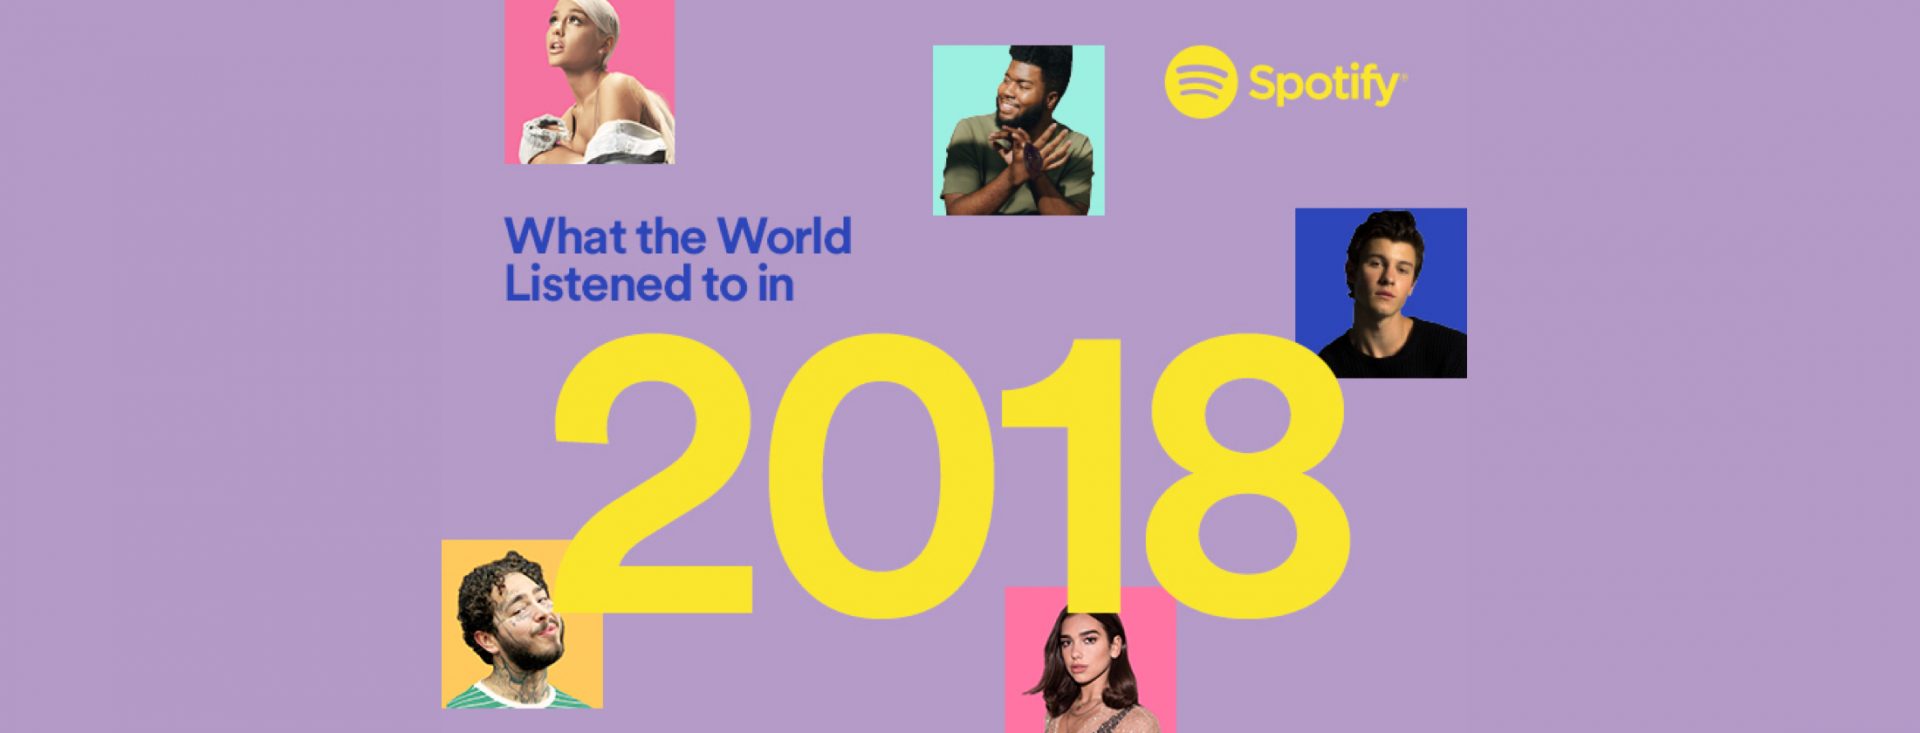 Spotify Monthly Listeners Chart 2017